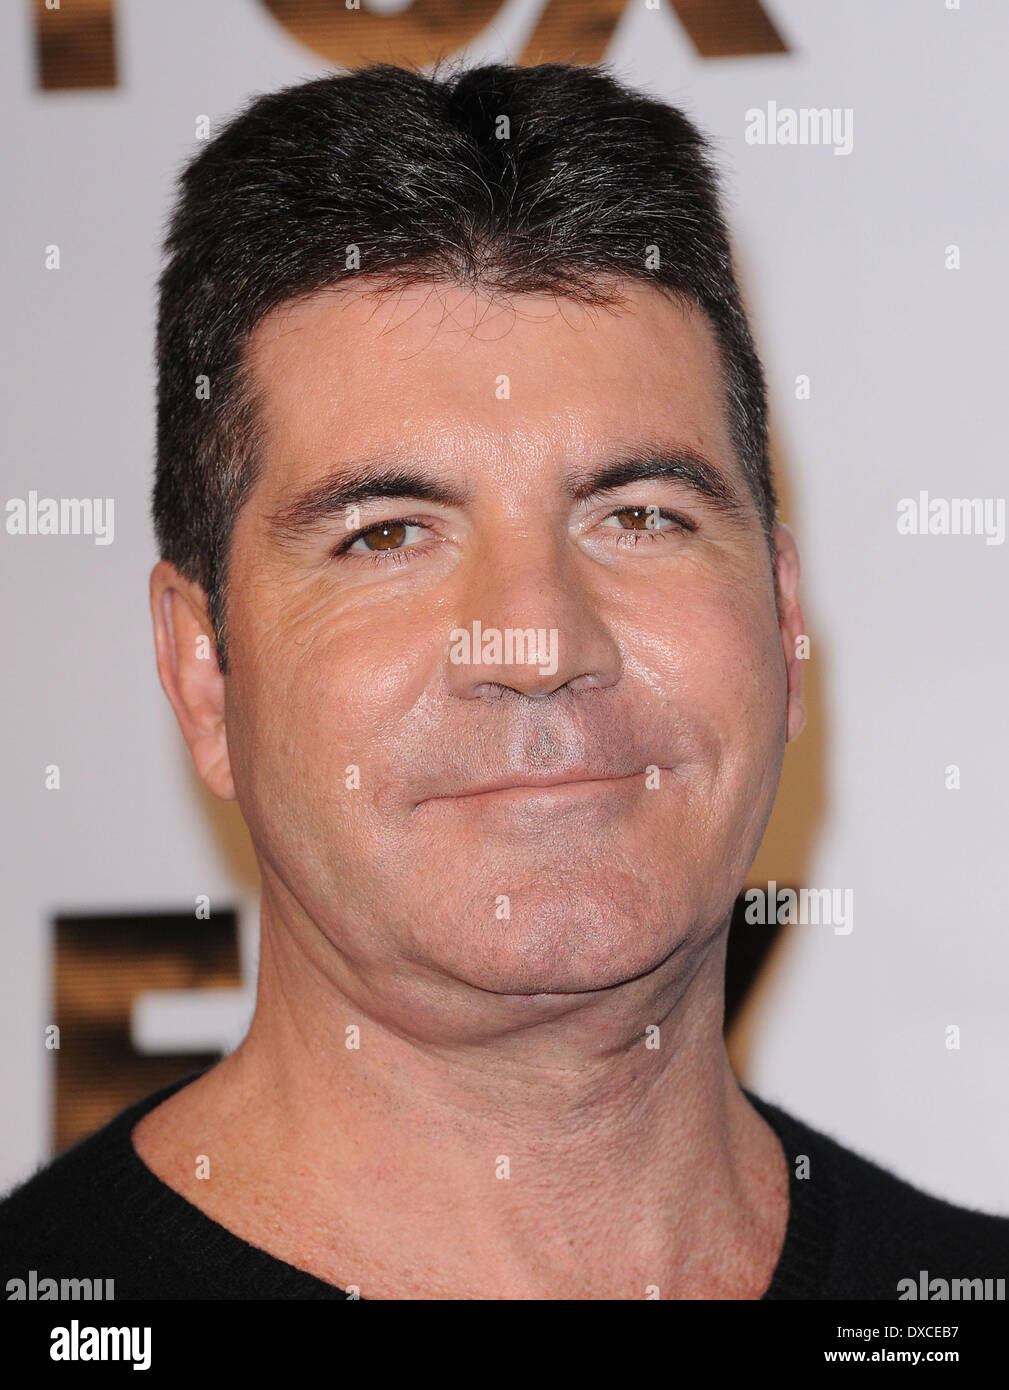 Simon Cowell, at The X Factor Viewing Party held at Mixology Los Angeles, California - 06.12.12 Featuring: Simon Cowell When: 0 Stock Photo